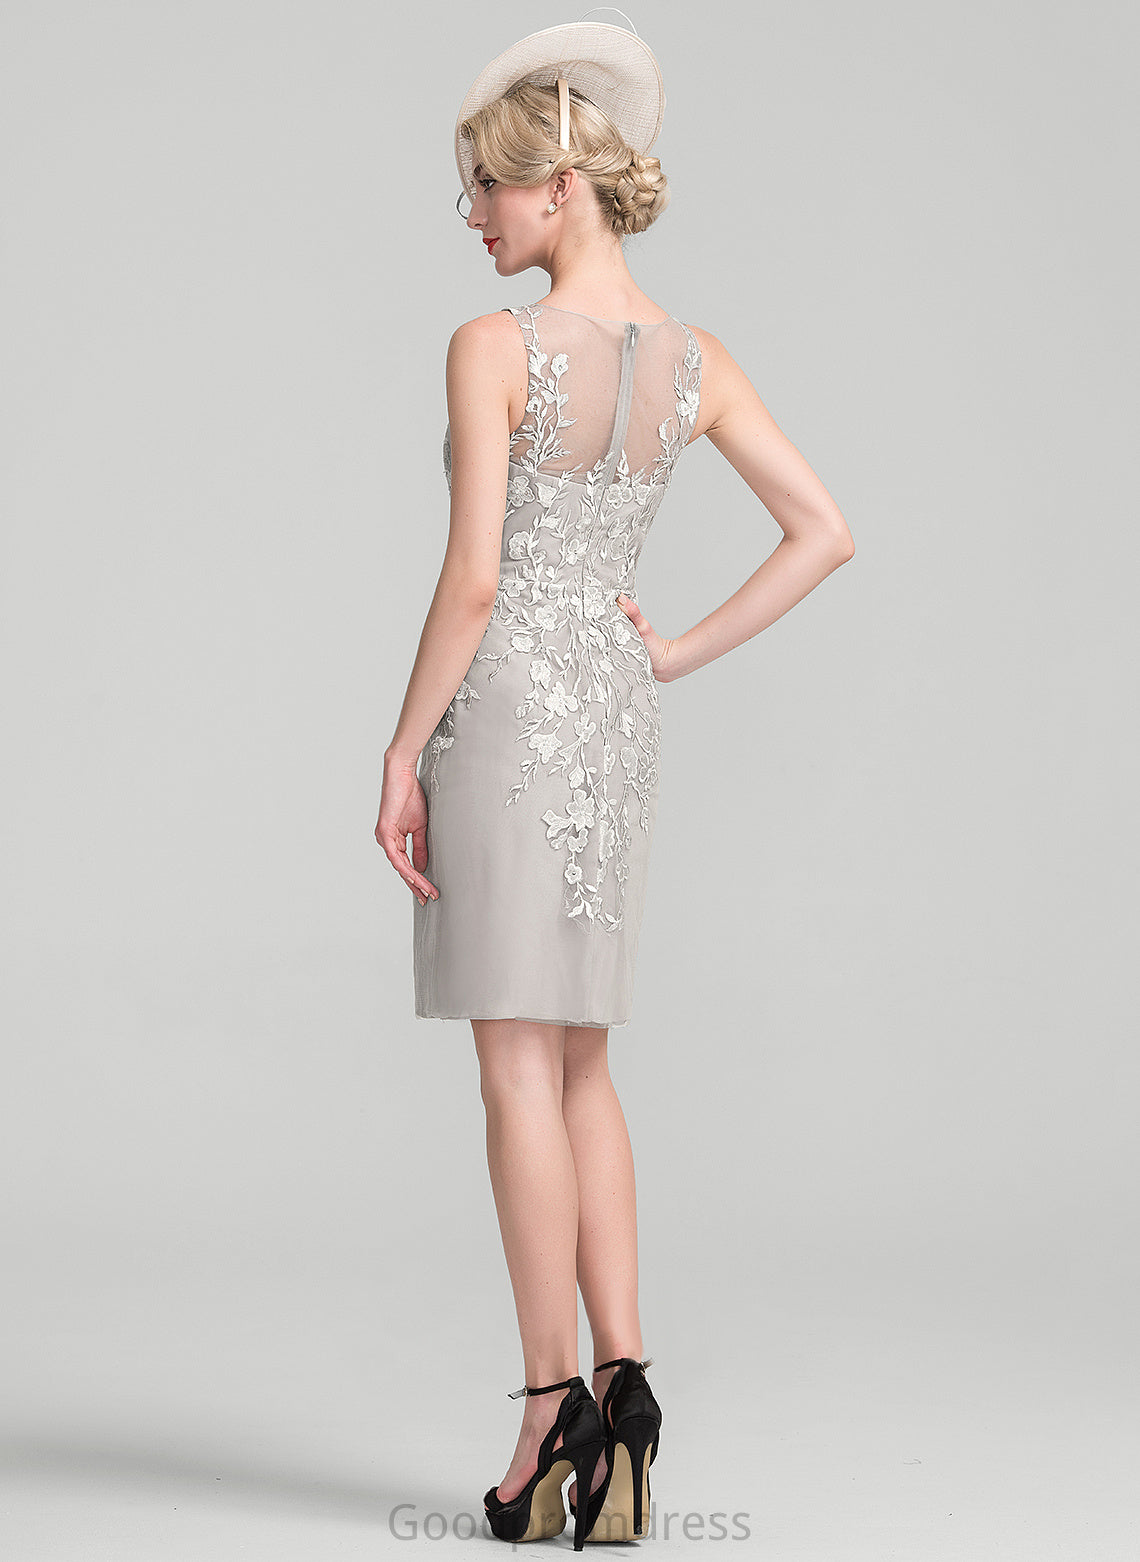 Beading Dress the Sequins Sheath/Column Knee-Length With Scoop Mother of the Bride Dresses of Lilliana Bride Mother Lace Neck Chiffon